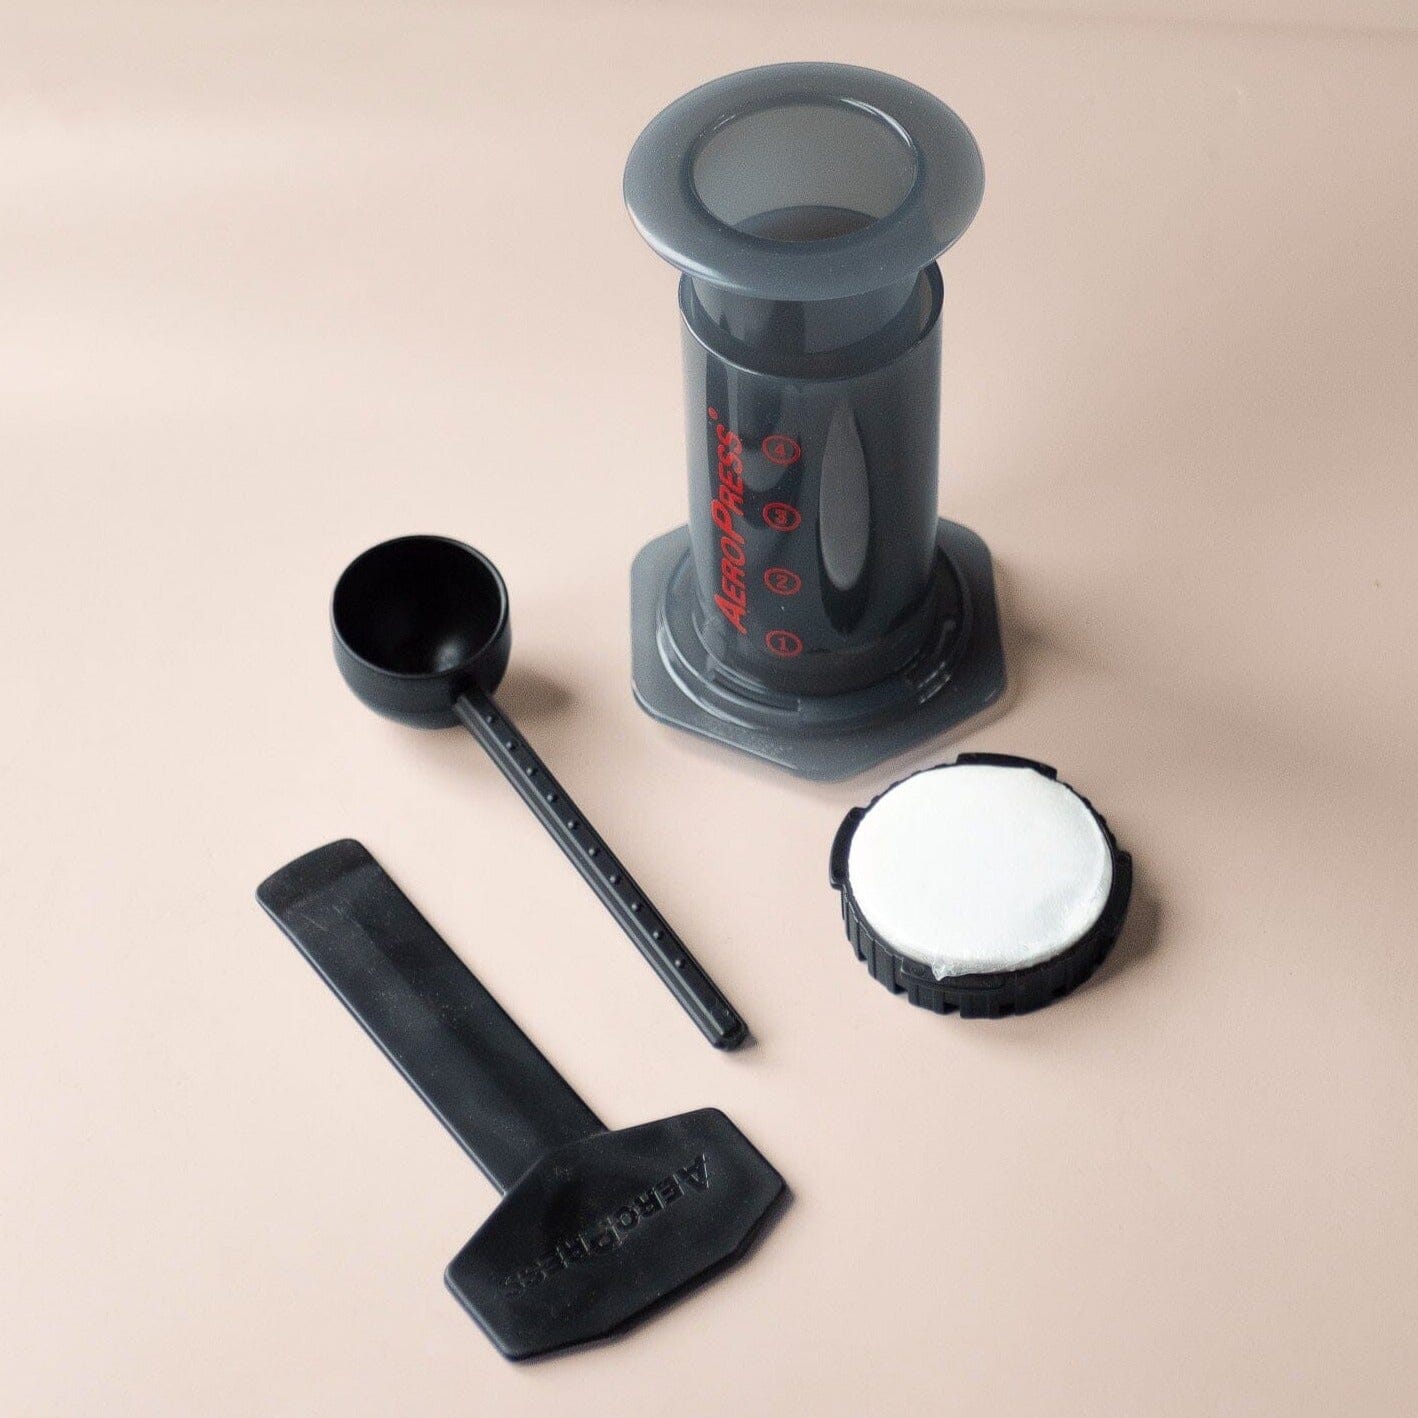 aeropress coffee maker, with scoop and filters. Free tin of coffee.